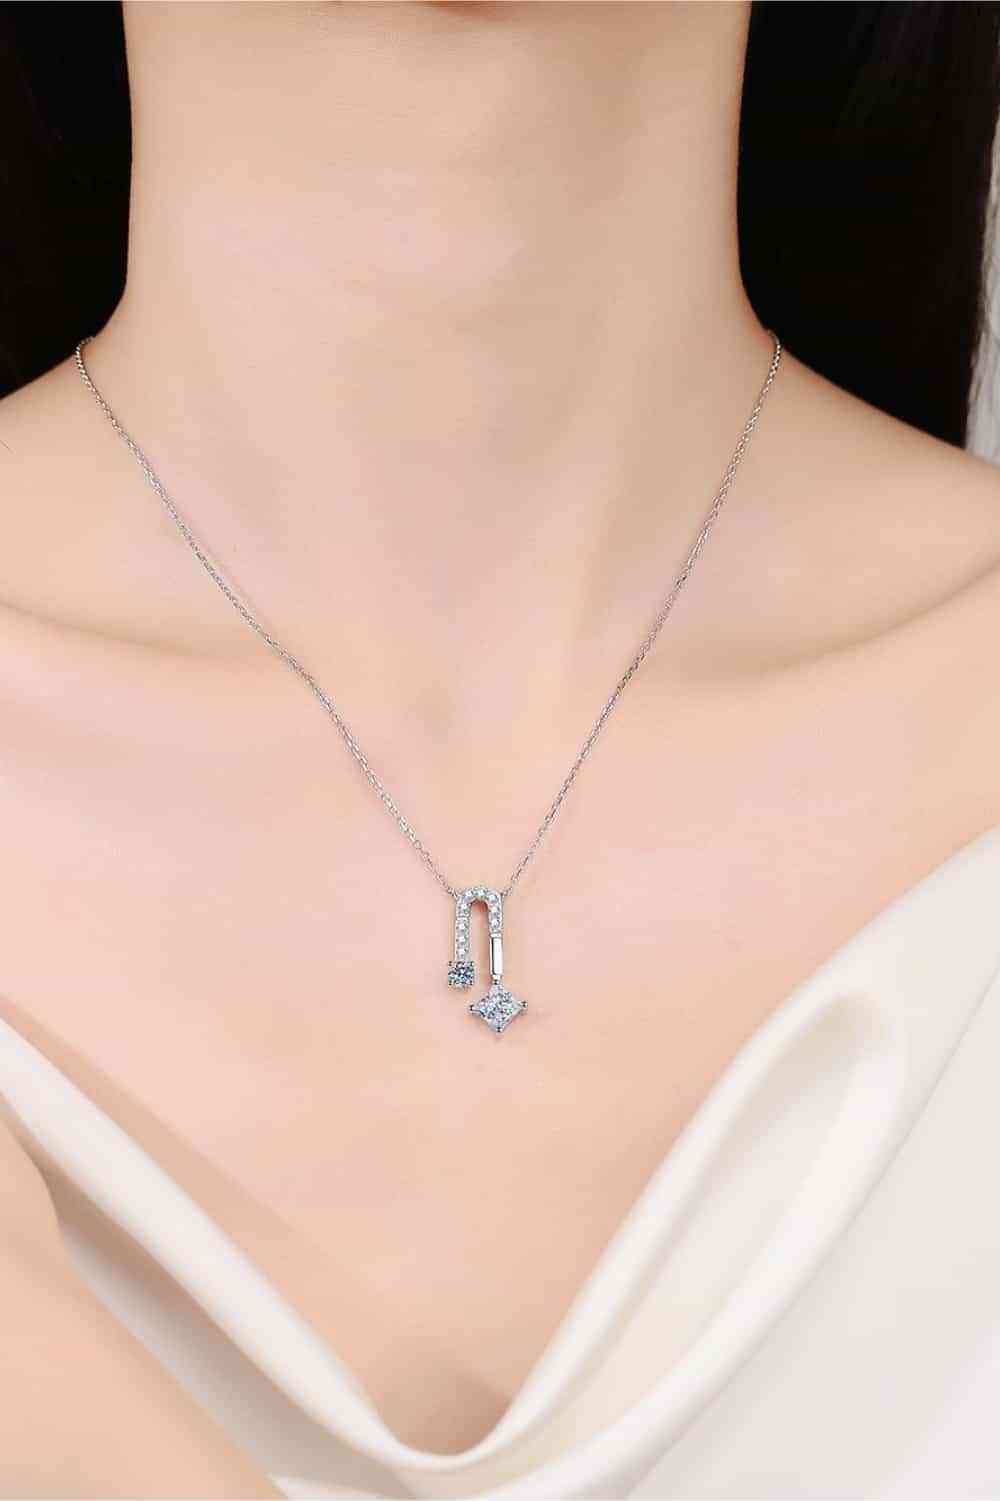 1.3 Carat Moissanite 925 Sterling Silver Necklace - Shop Tophatter Deals, Electronics, Fashion, Jewelry, Health, Beauty, Home Decor, Free Shipping